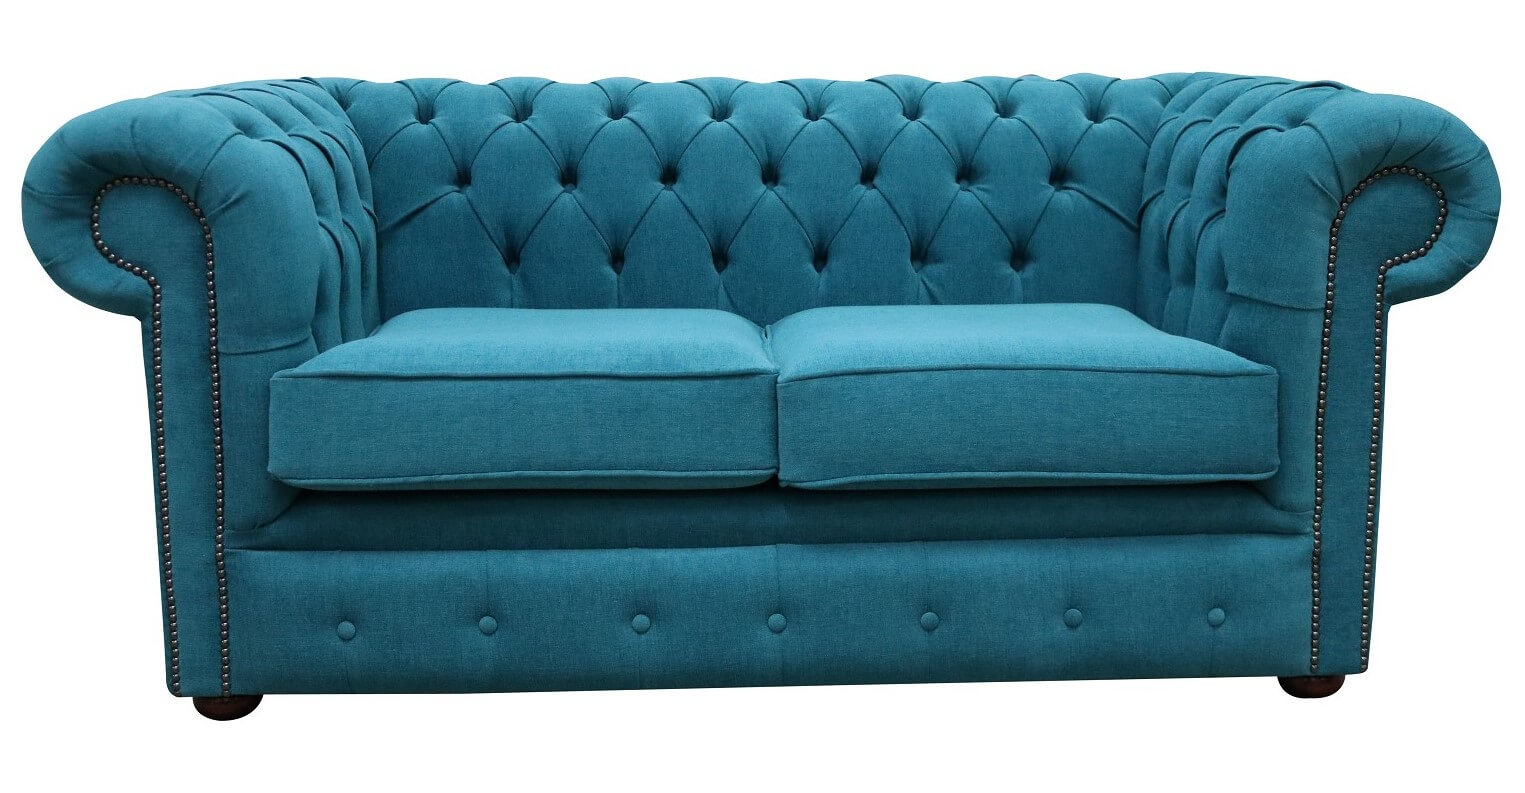 Authentic Elegance Unveiled Deciphering the True Chesterfield Sofa  %Post Title